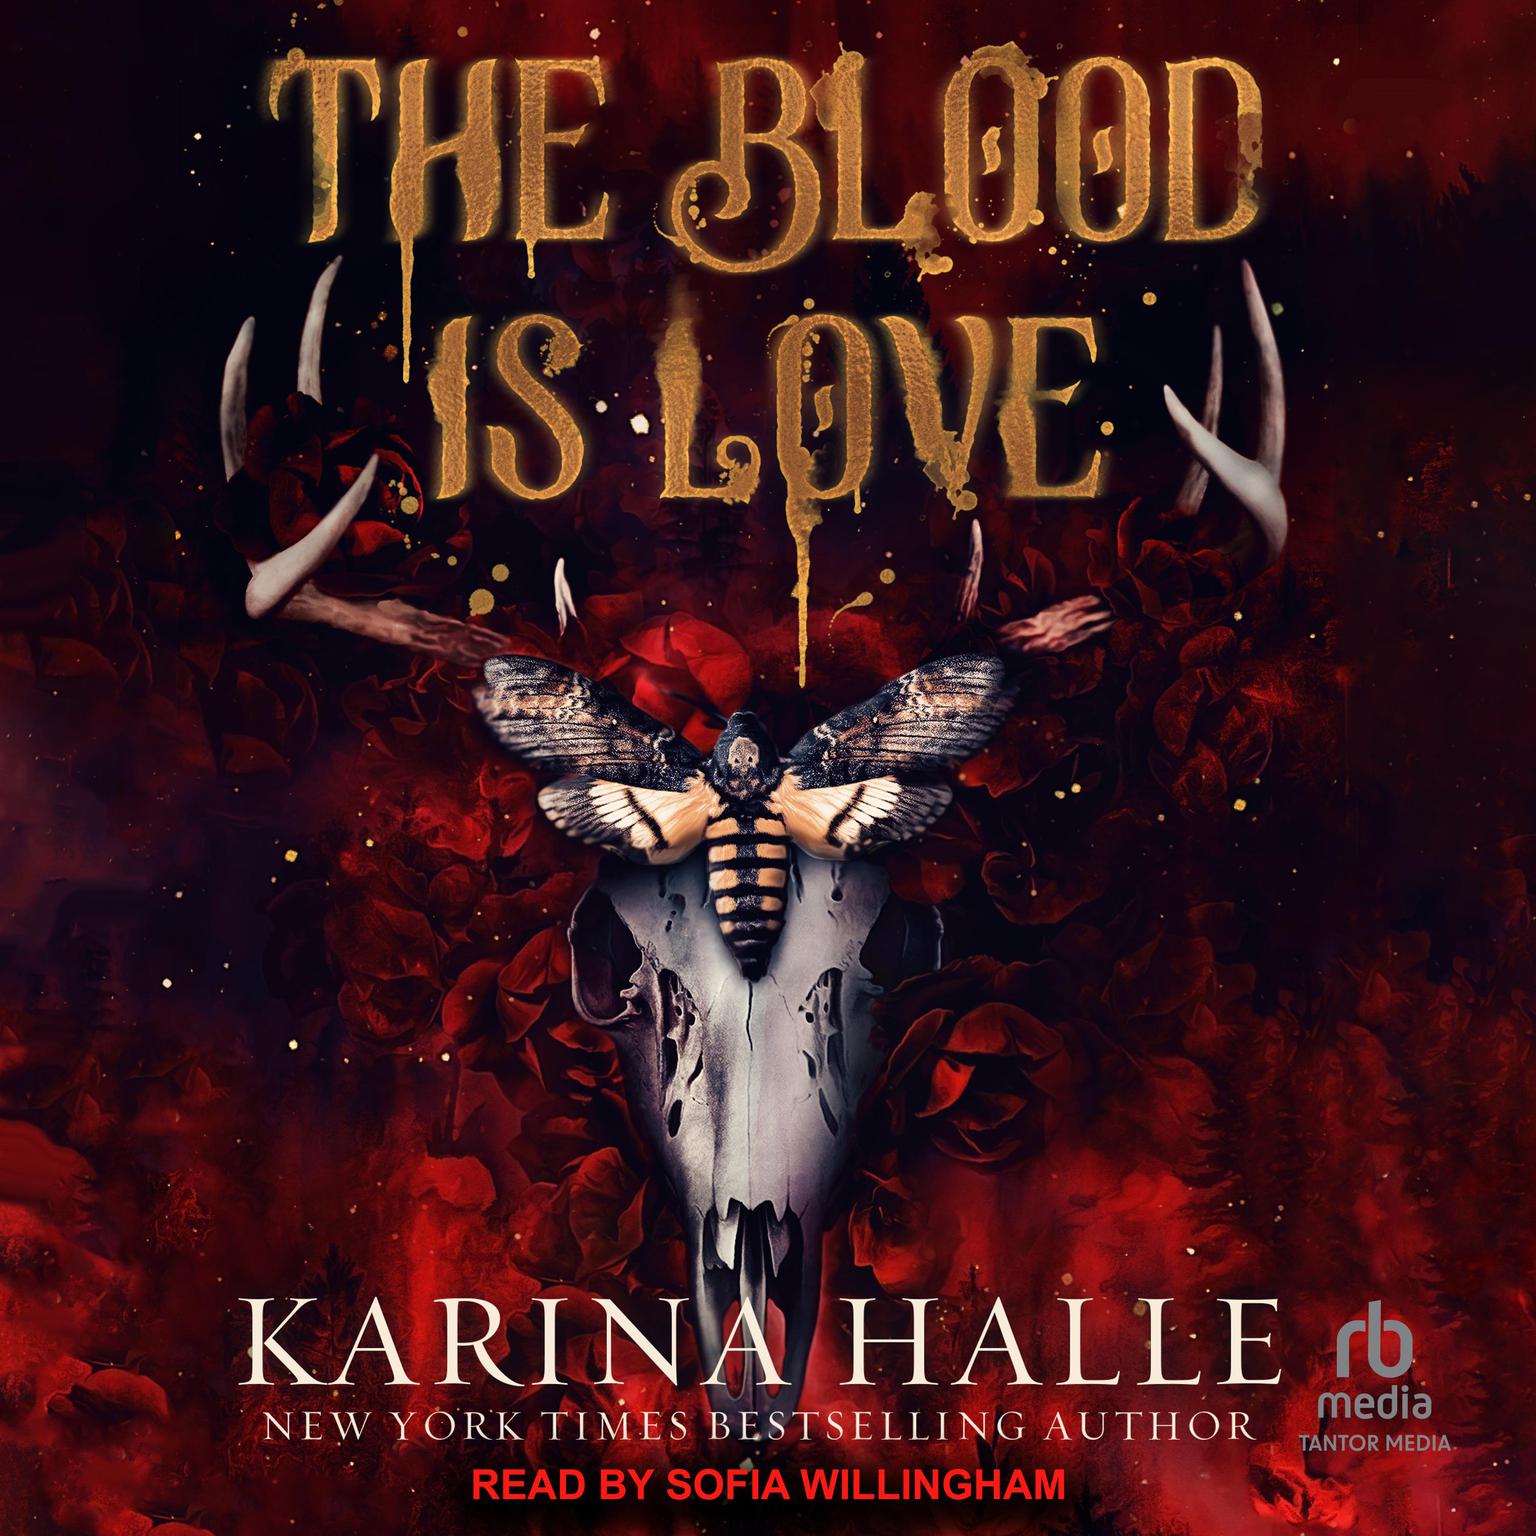 The Blood is Love Audiobook, by Karina Halle